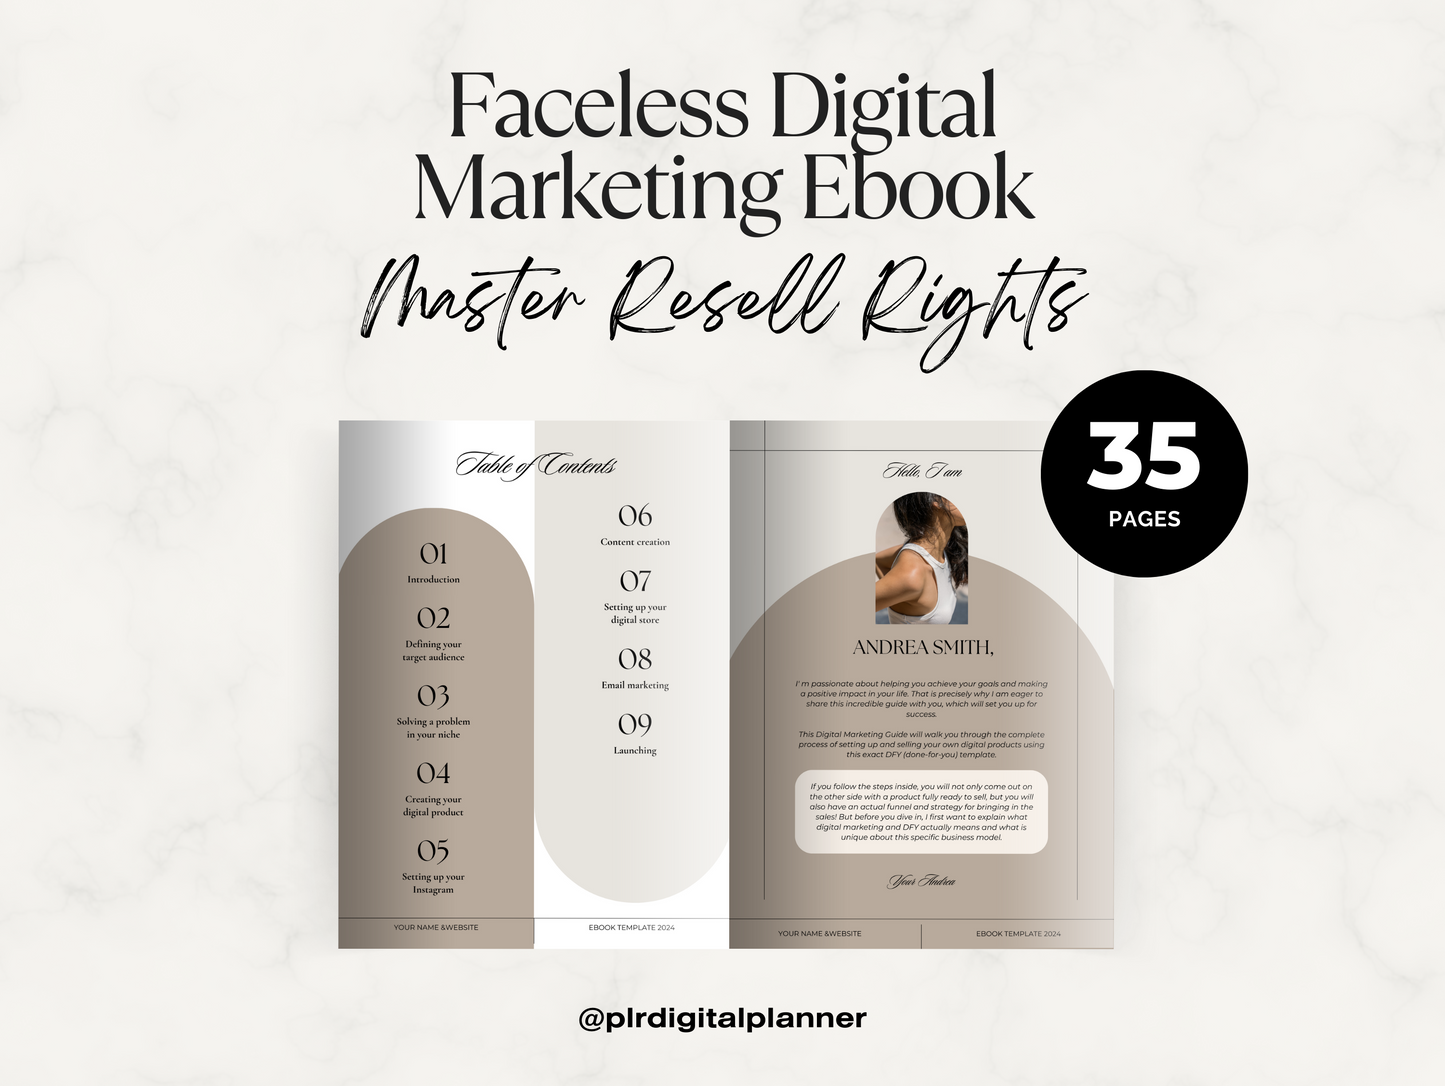 Faceless Digital Marketing with Master Resell Rights